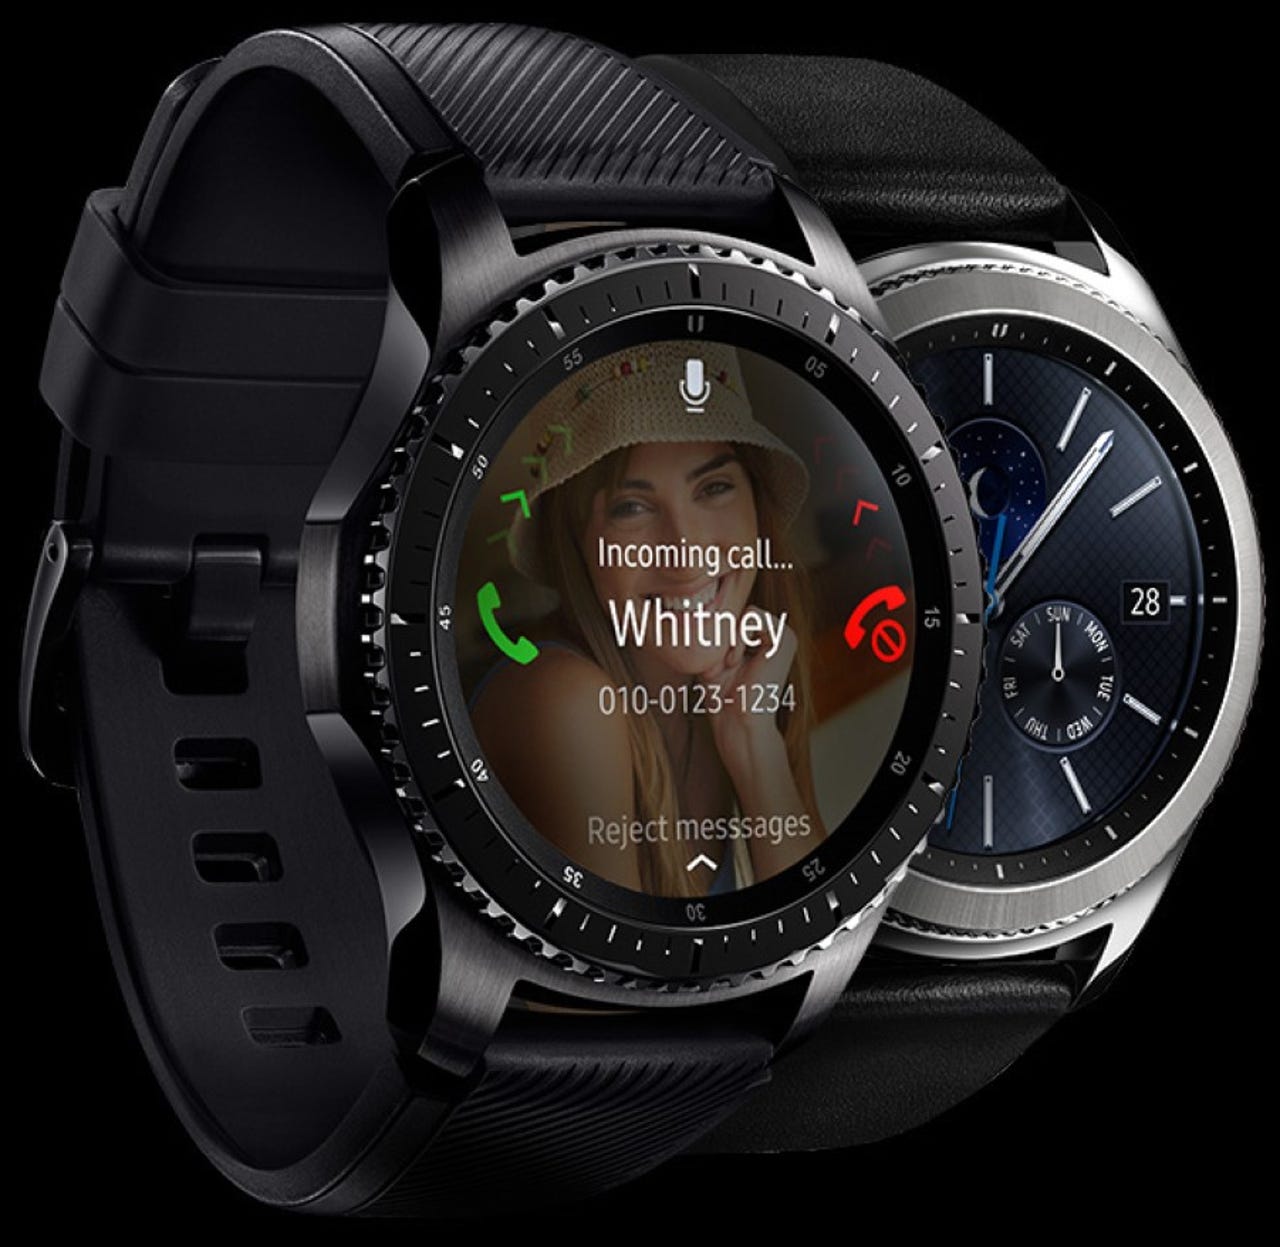 Samsung announces Gear S3 Classic and Frontier smartwatches with LTE, and Samsung Pay | ZDNET